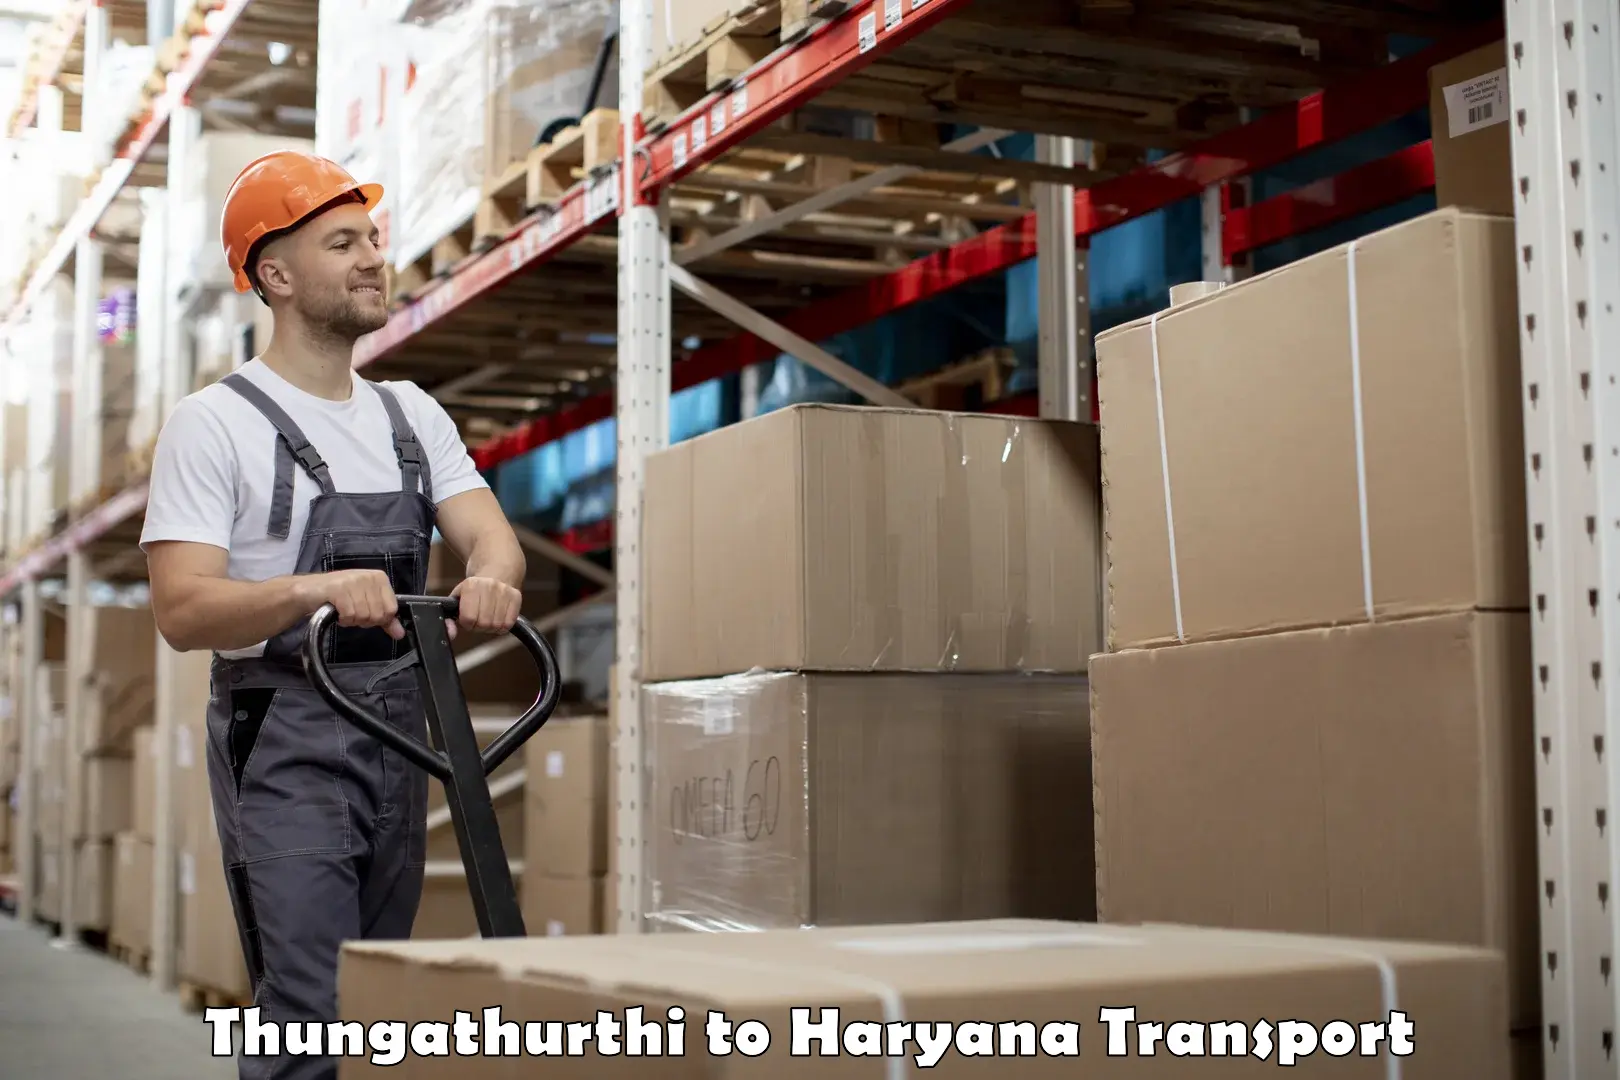 Best transport services in India in Thungathurthi to Gurgaon